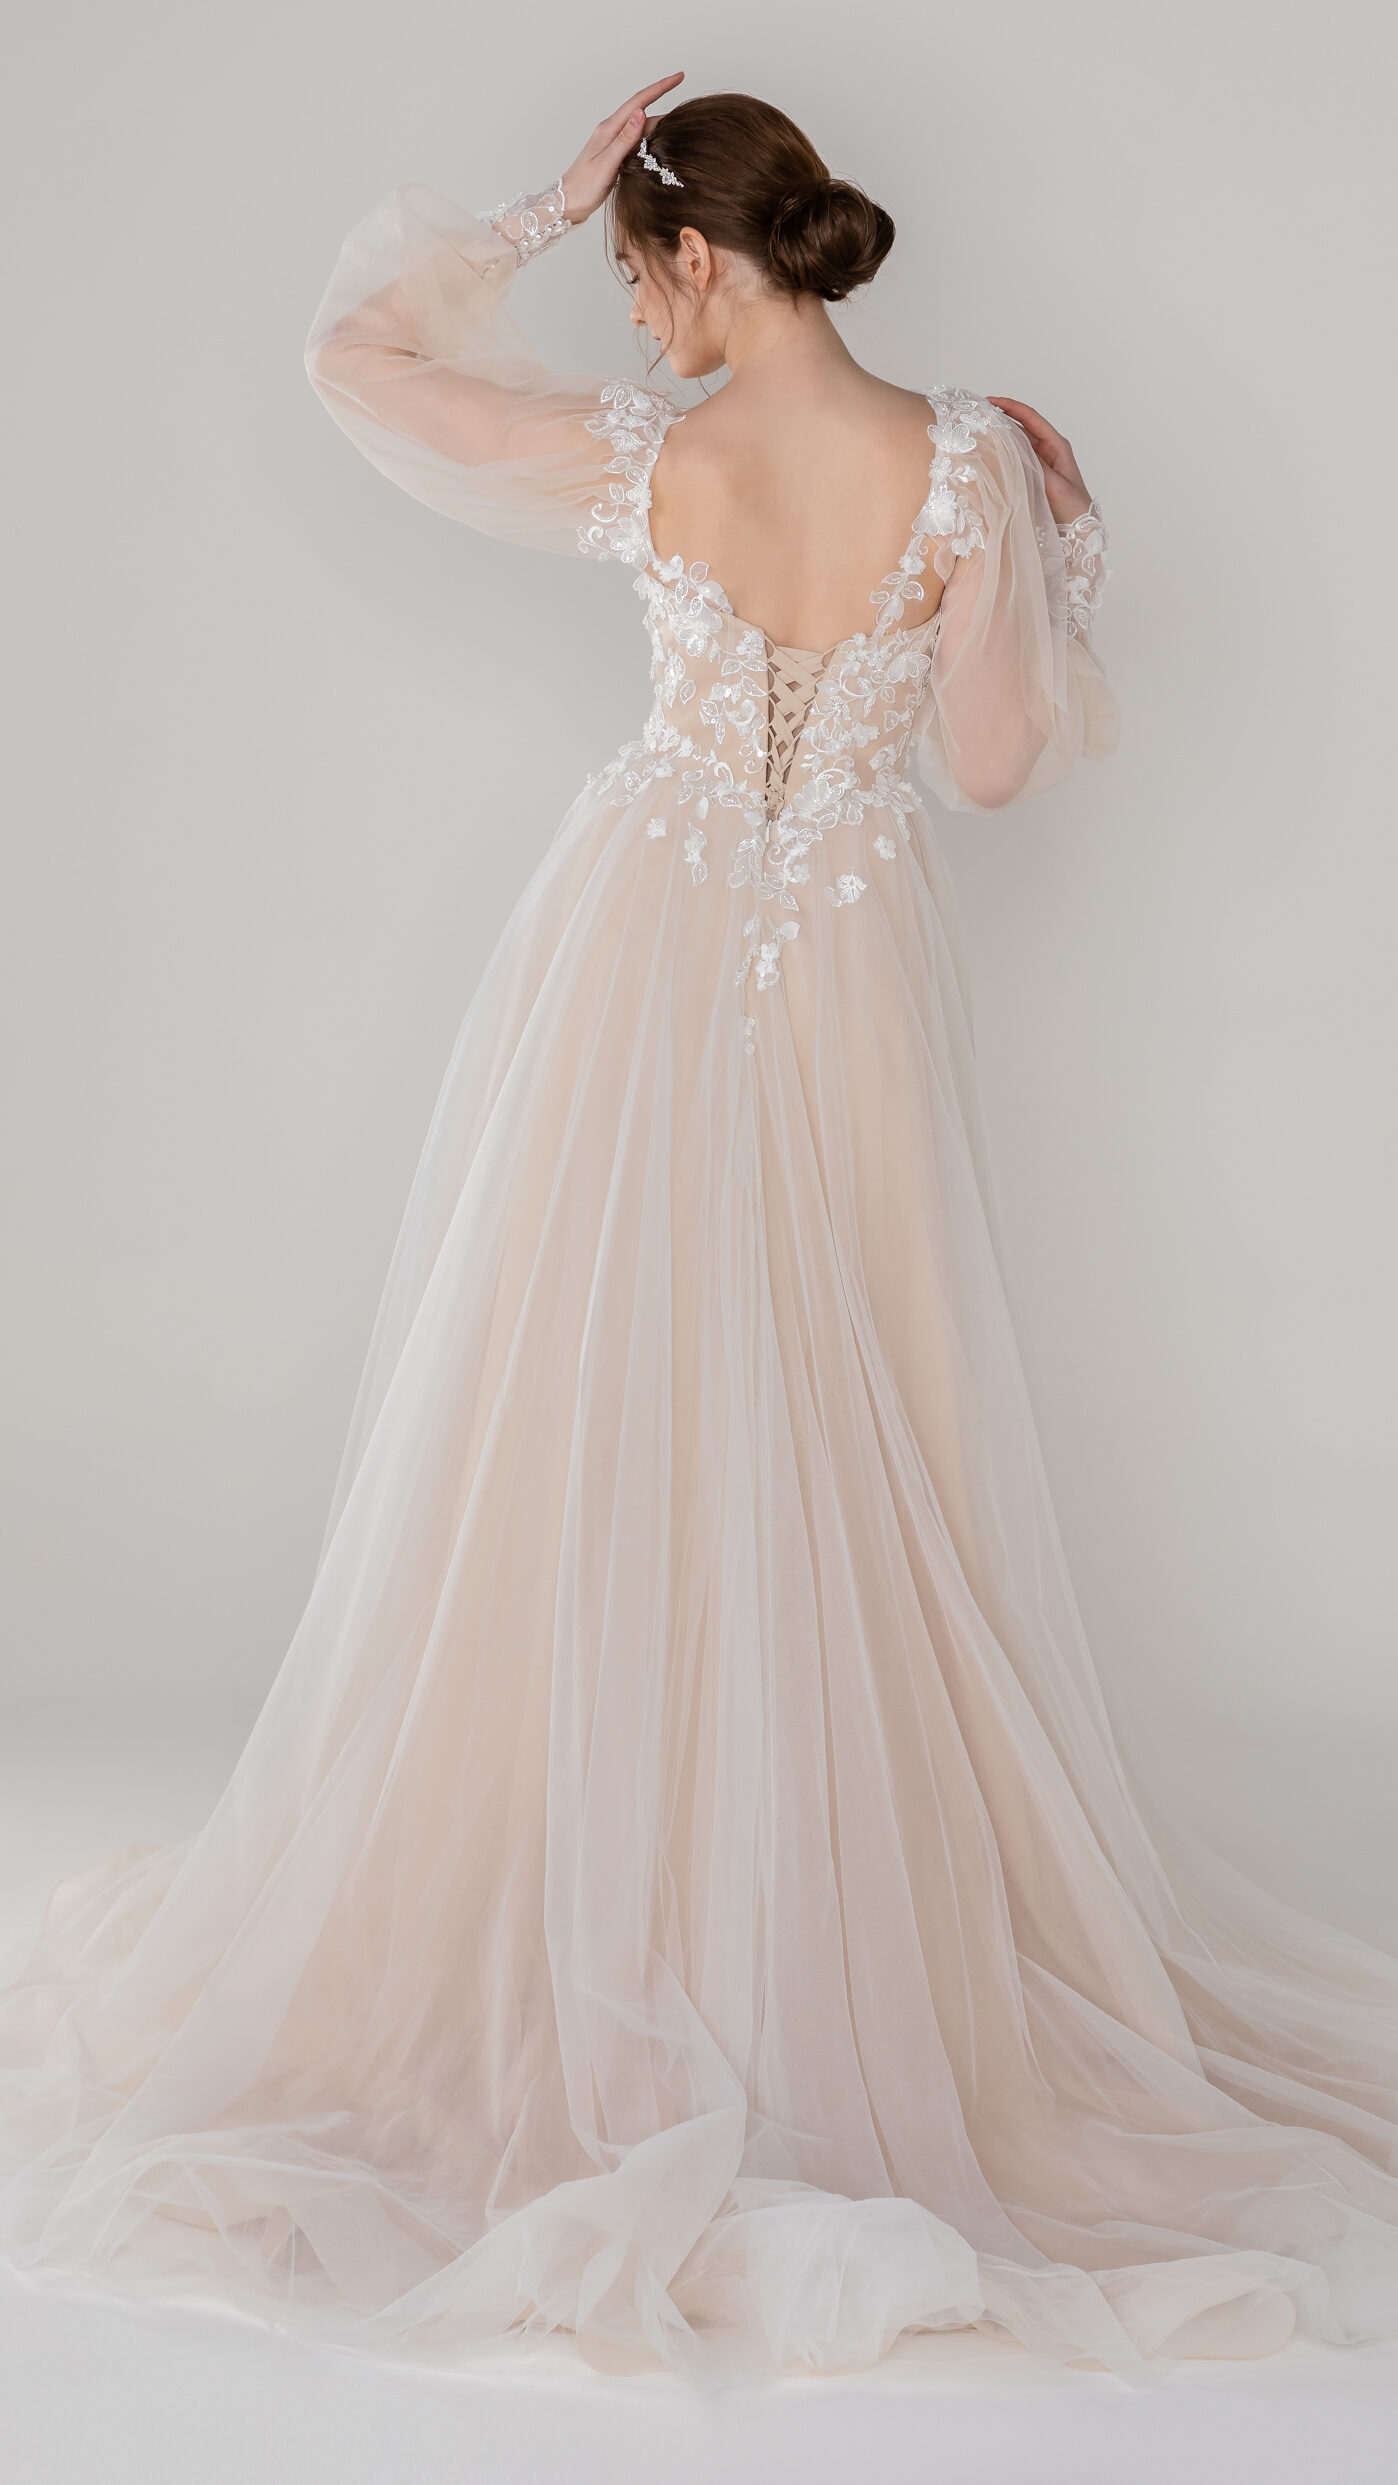 Romantic Wedding Dresses by Cocomelody - CW2533 | CAMERON